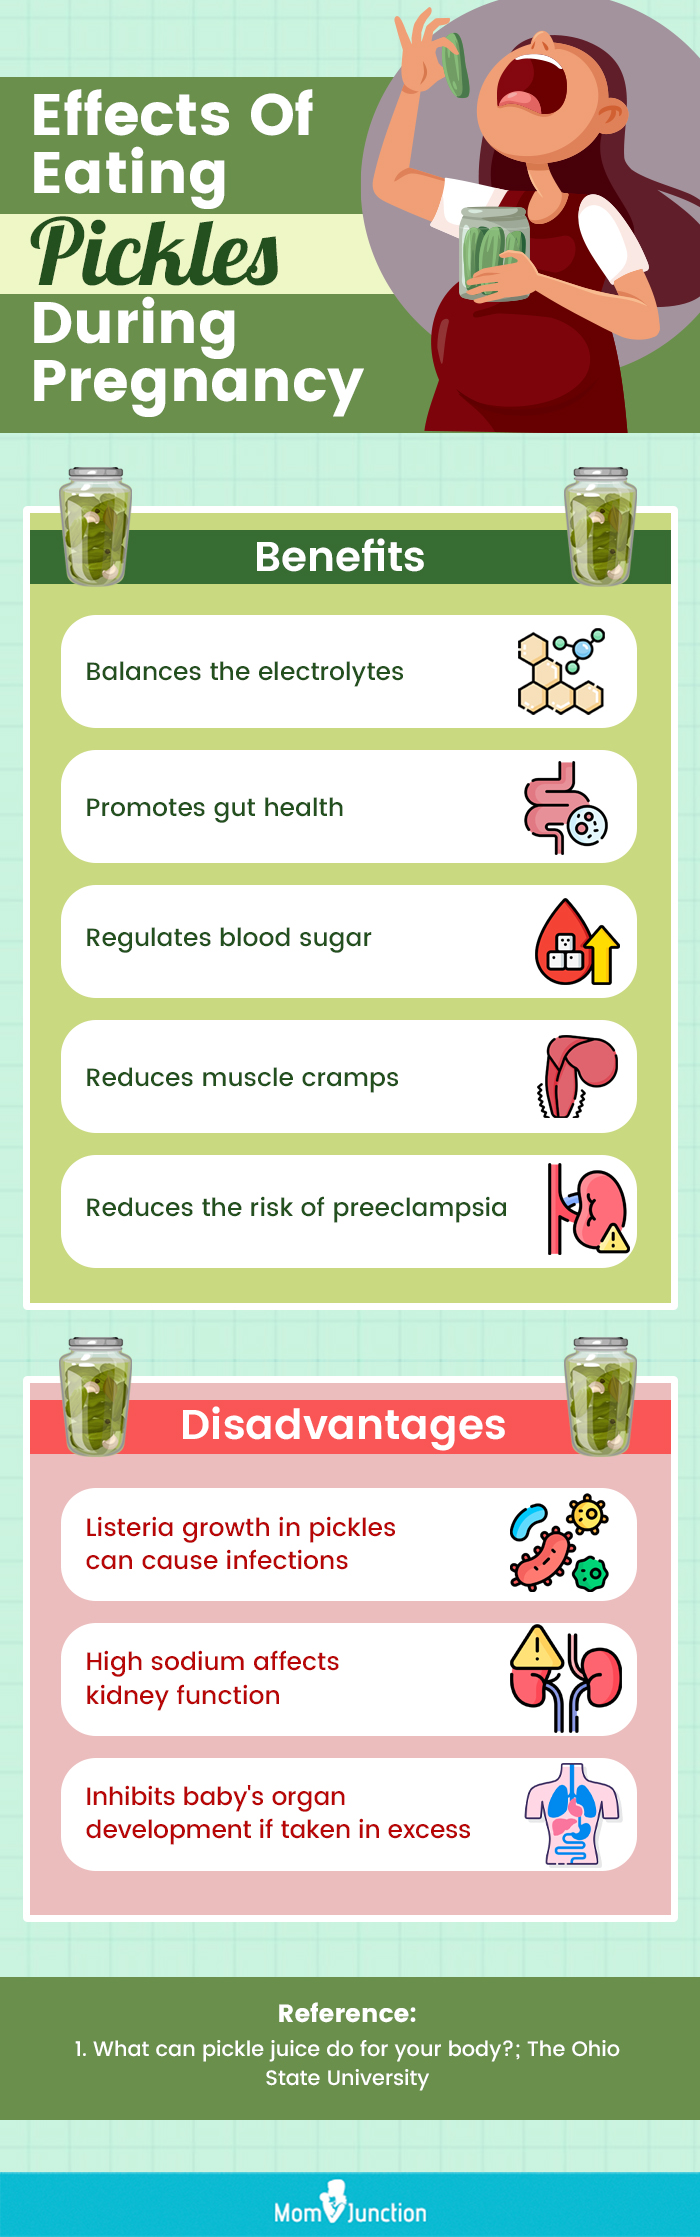 effects of eating pickles during pregnancy (infographic)